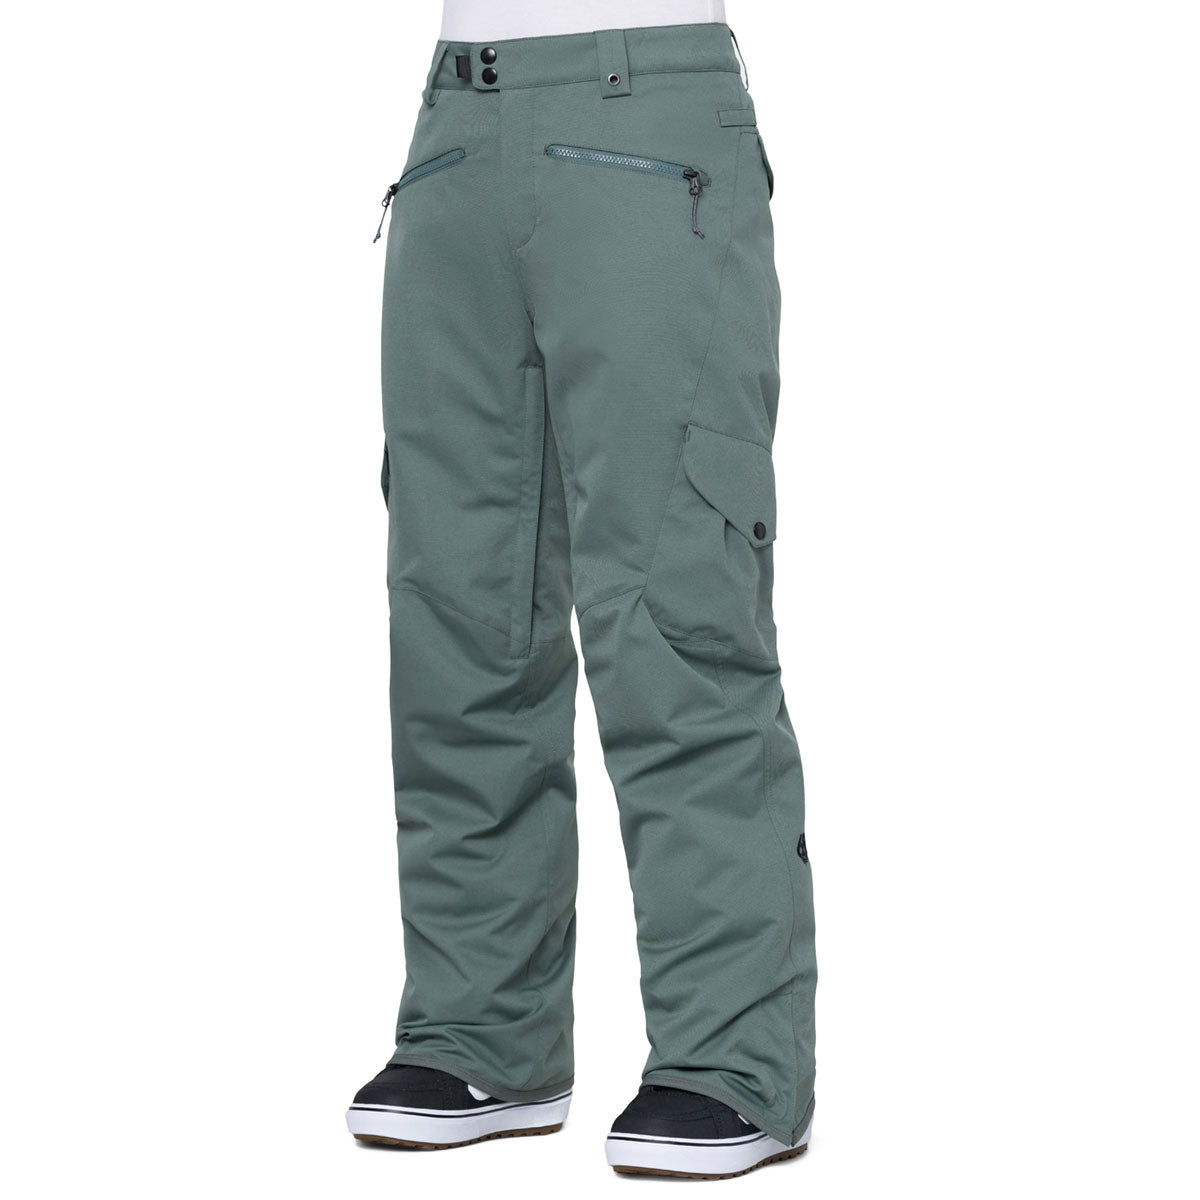 686 Womens Aura Insulated Cargo Snowboard Pants - Cypress Green image 1